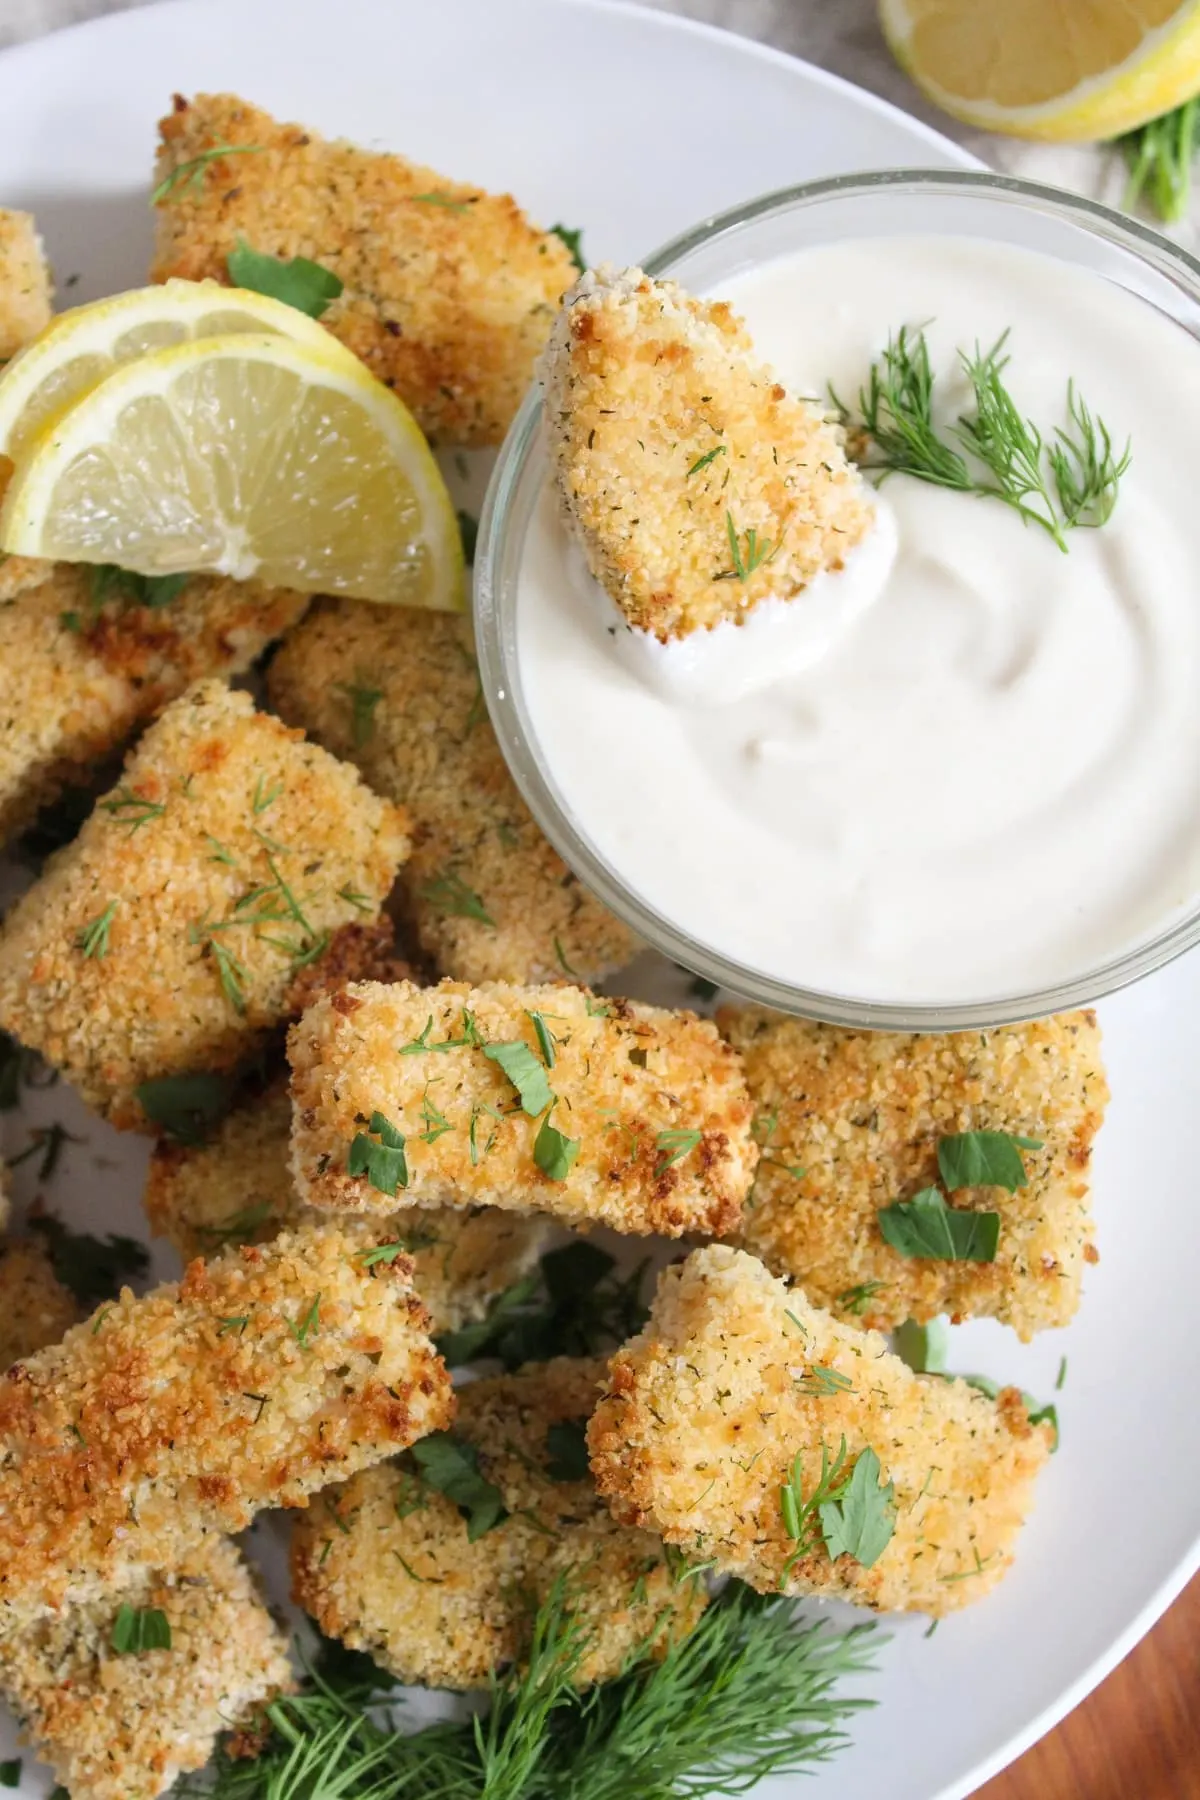 A creamy mustard sauce with a breaded dipping snack and lemons on the side.